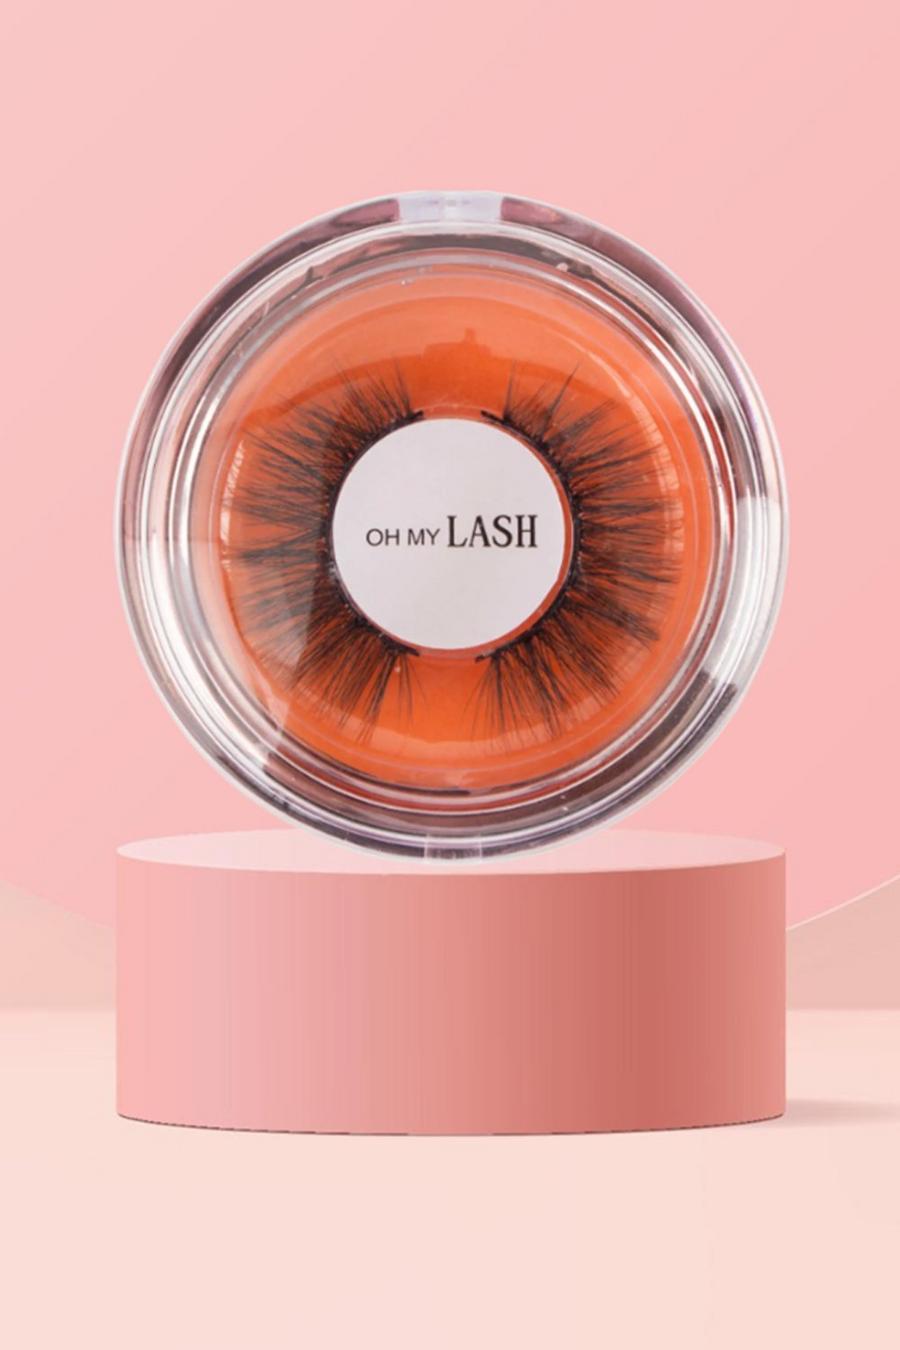 Oh My Lash - Faux cils - Girl Time, Orange